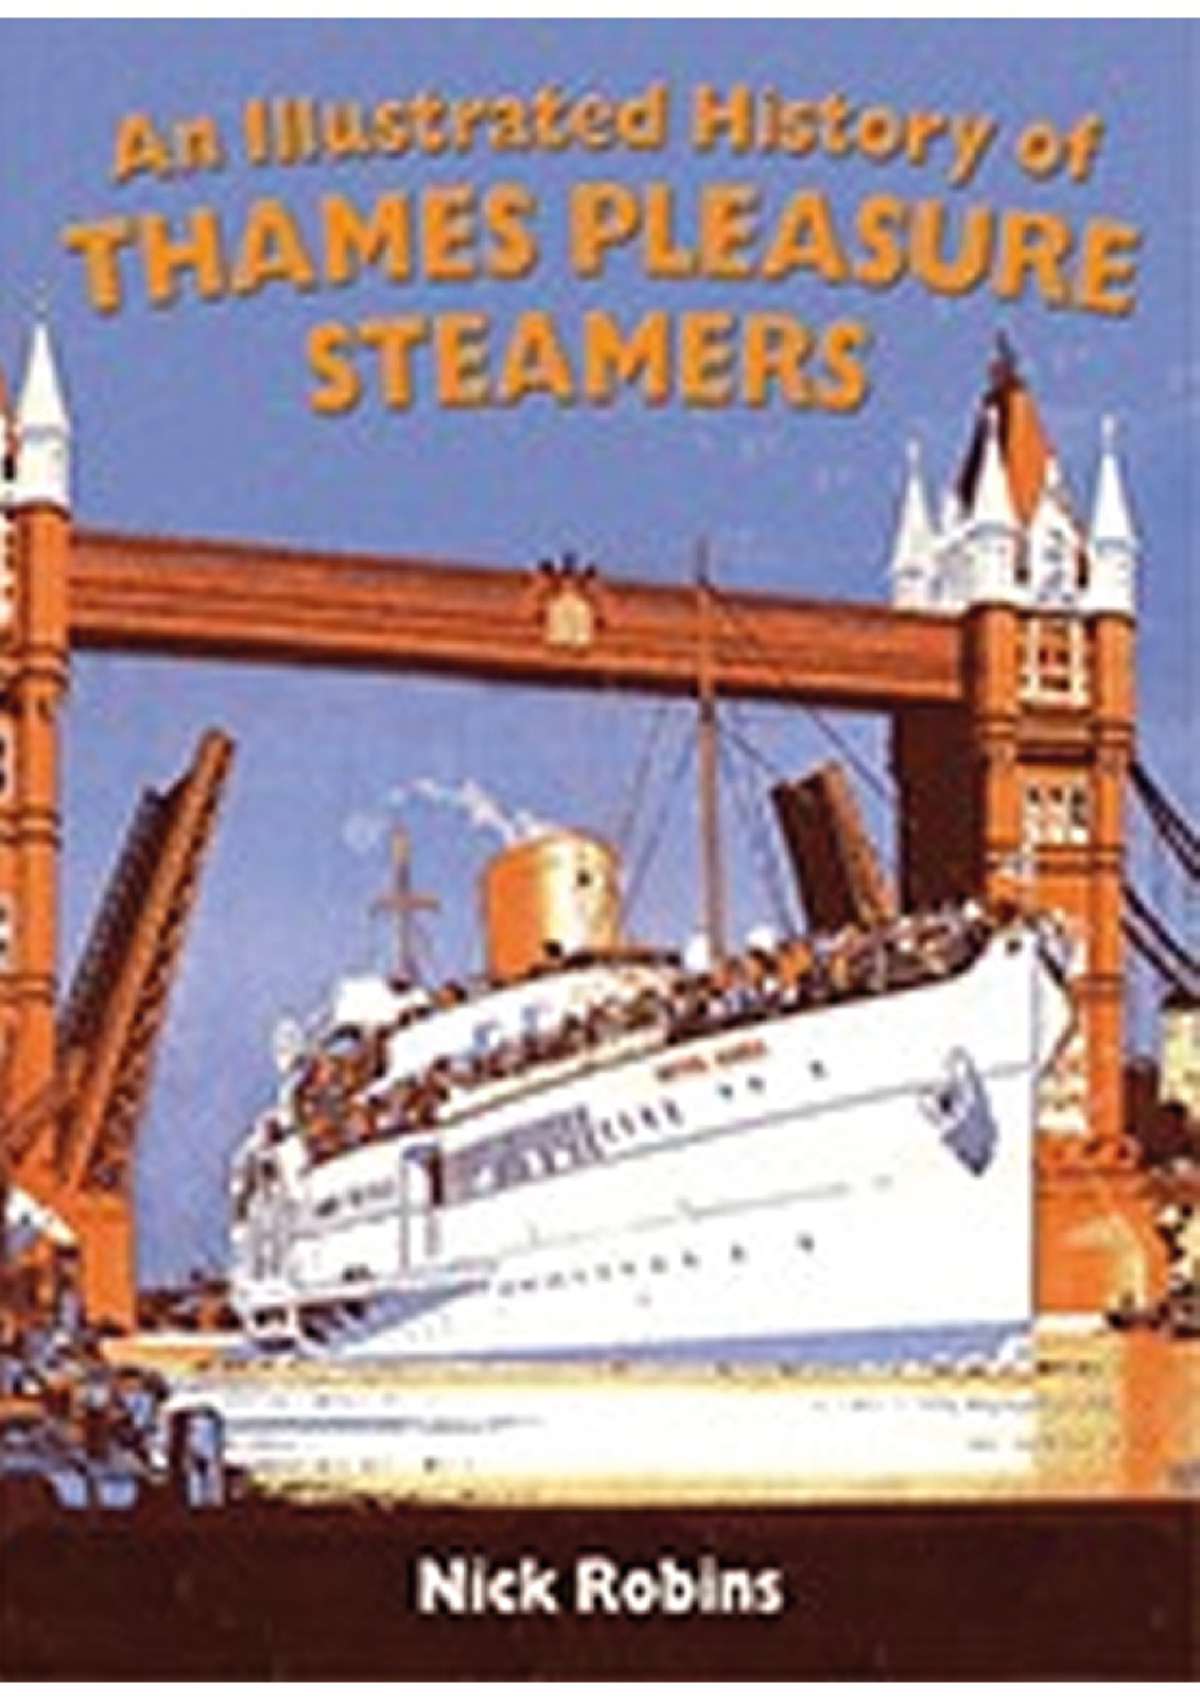 3184 - An Illustrated History of Thames Pleasure Steamers